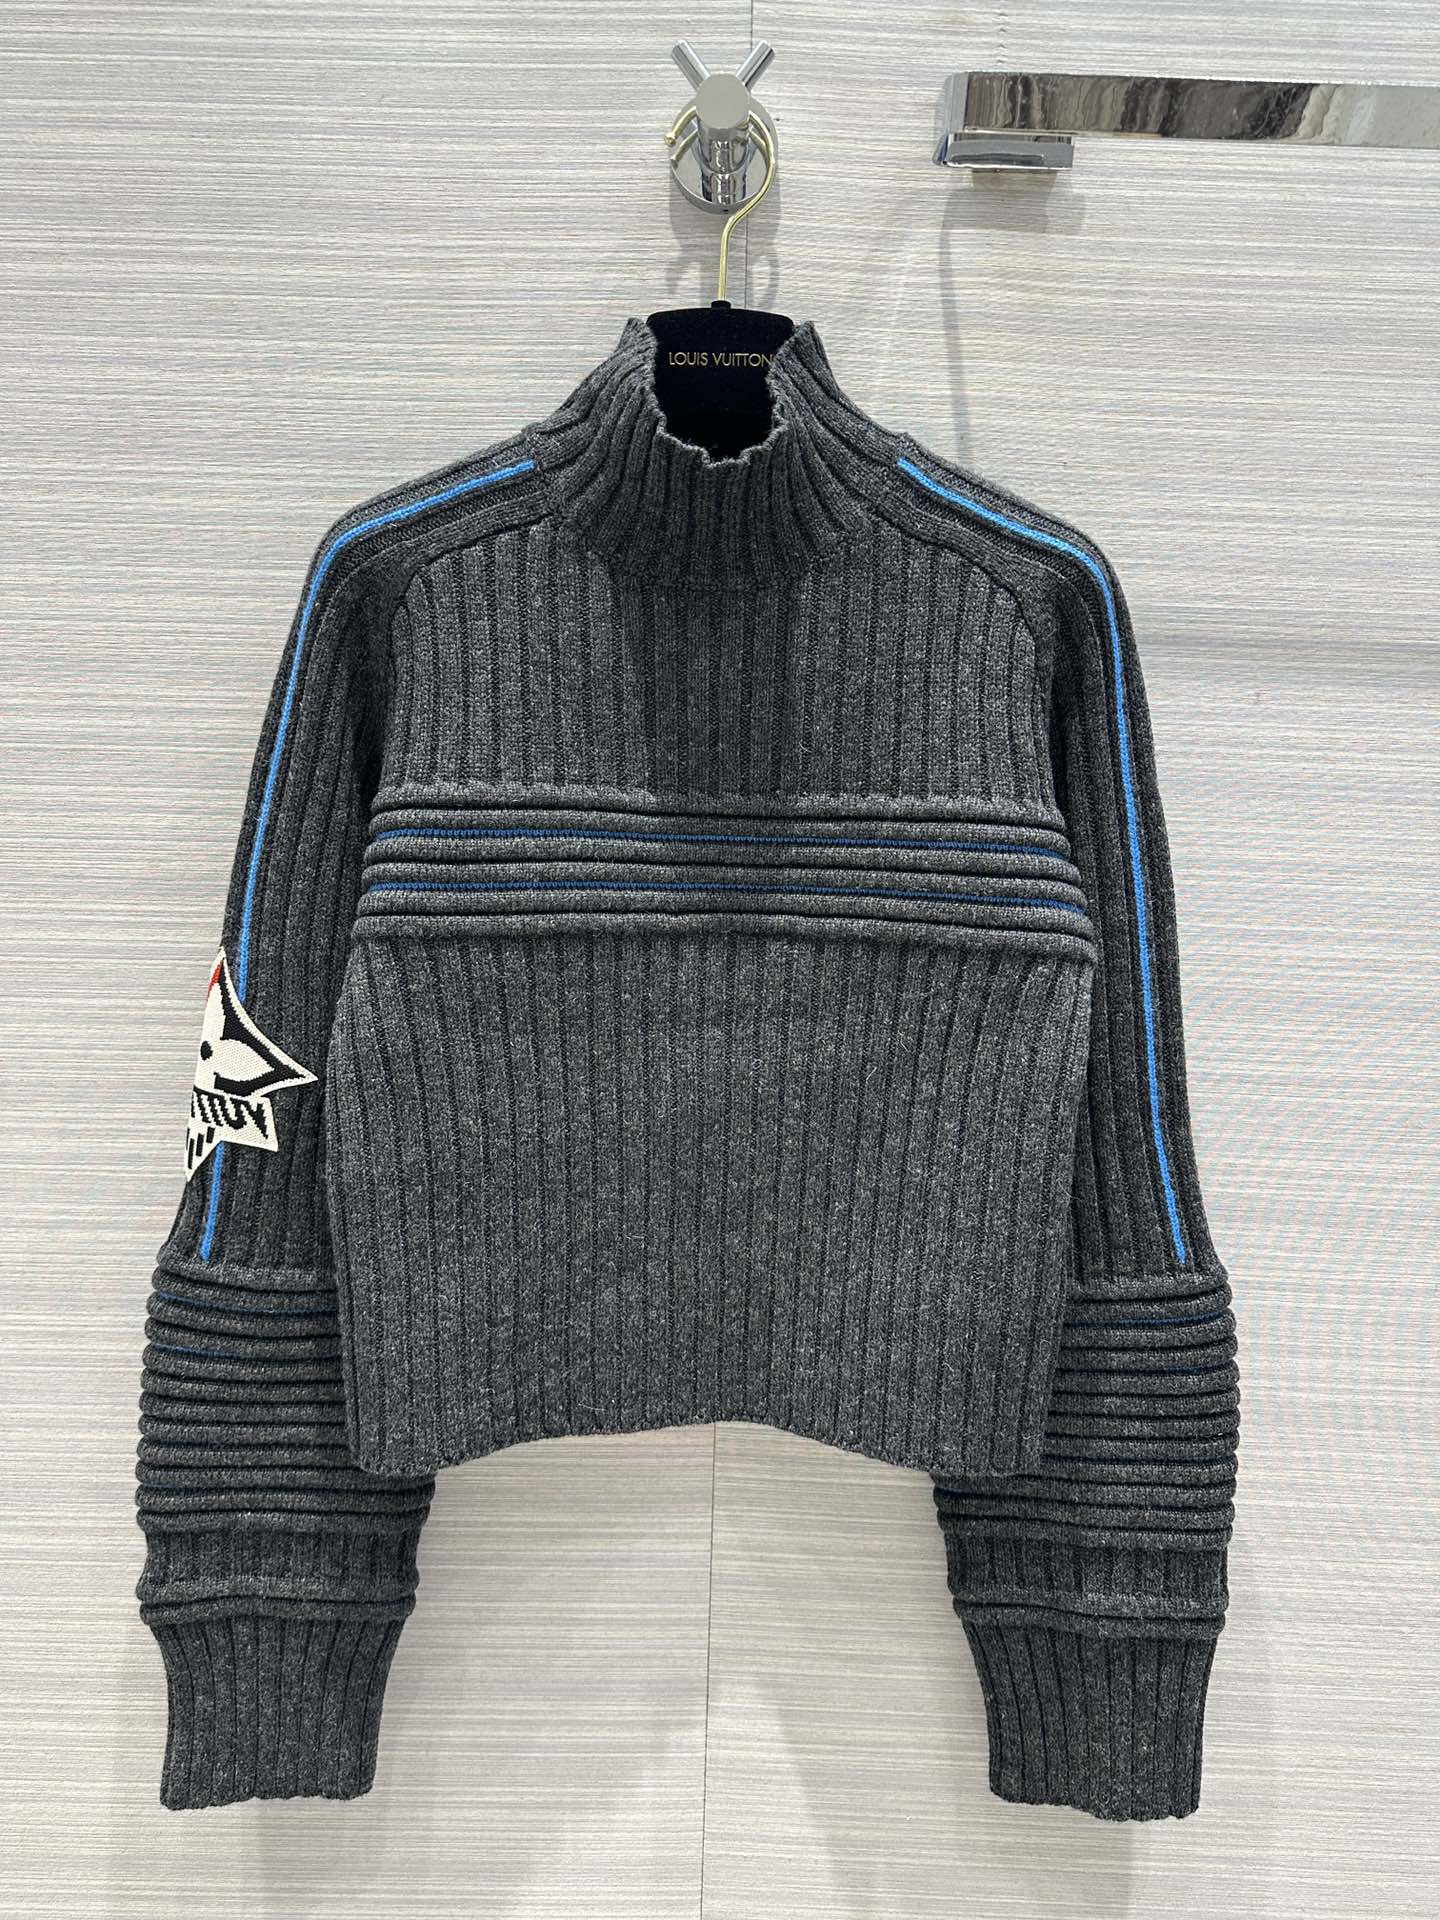 1:1 Replica
 Louis Vuitton Clothing Knit Sweater Sweatshirts White Cashmere Knitting Fall/Winter Collection